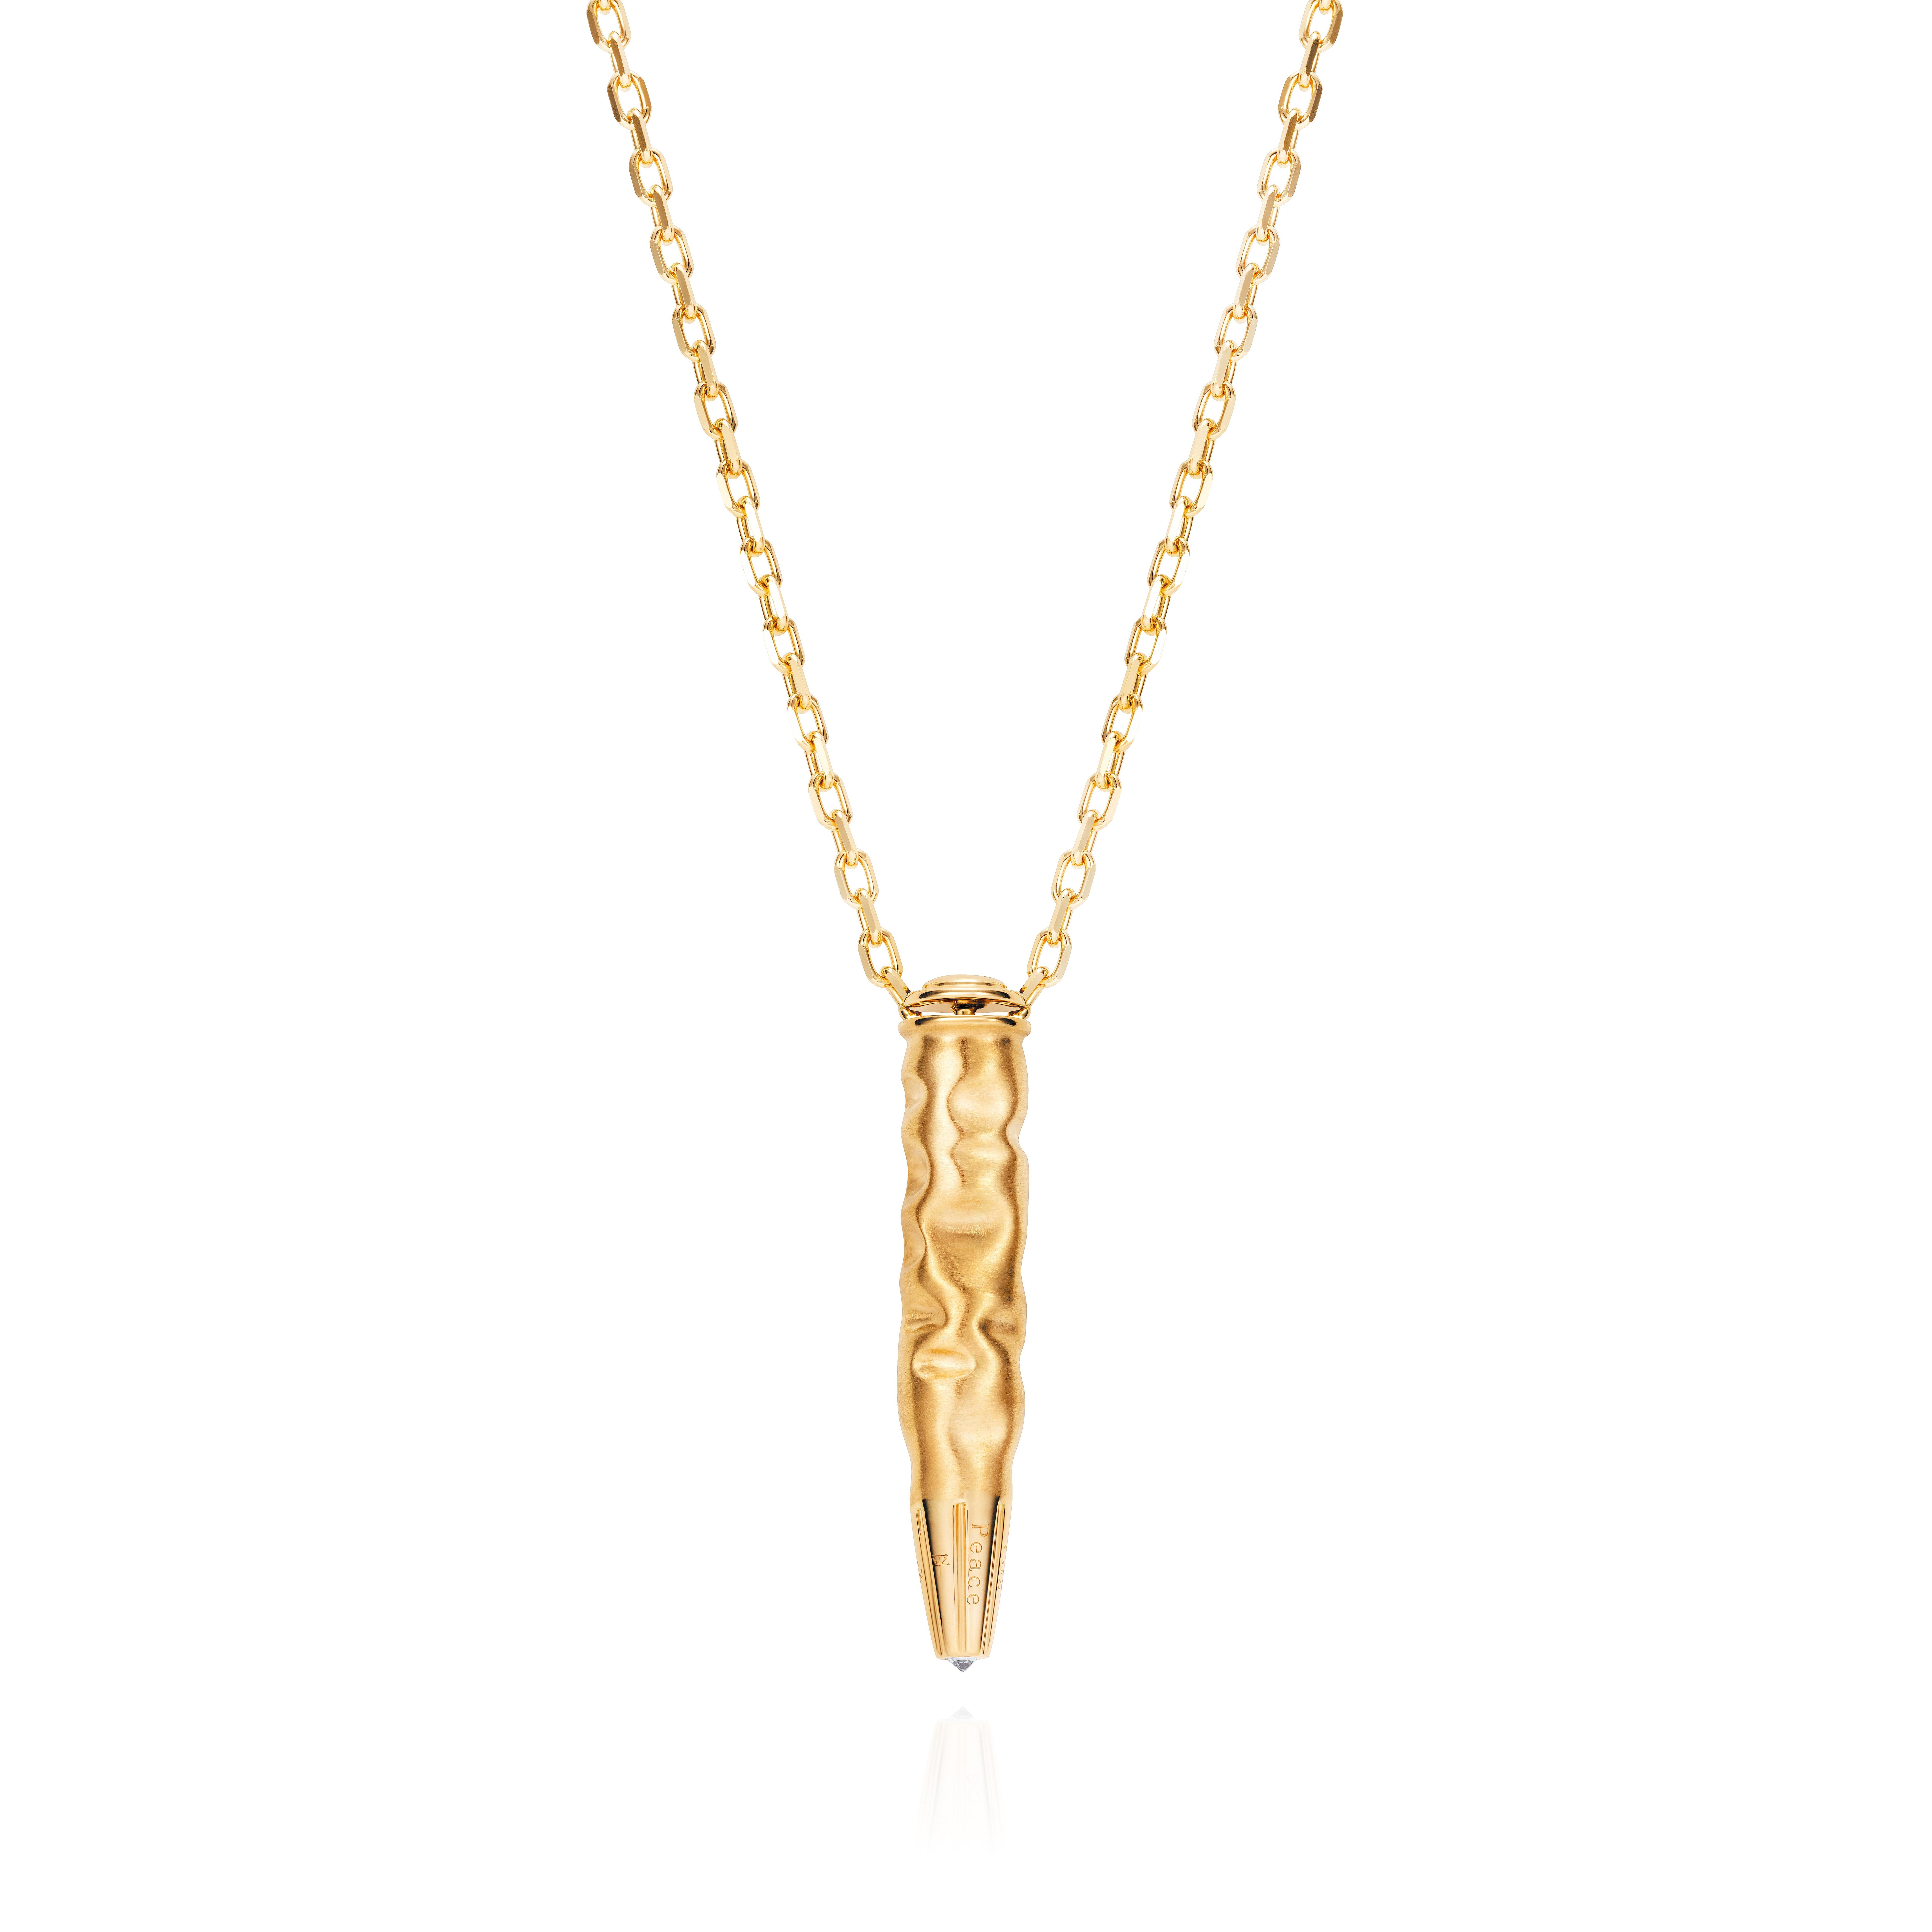 18 Karat Yellow Gold Pendant Set With a Diamond

The Bullet Peace pendant, pays tribute to the photographer, designer’s beloved friend, Leila Alaoui who did not survive the terrorist attack in Ouagadougou on January 15th 2016. Leila was working on a